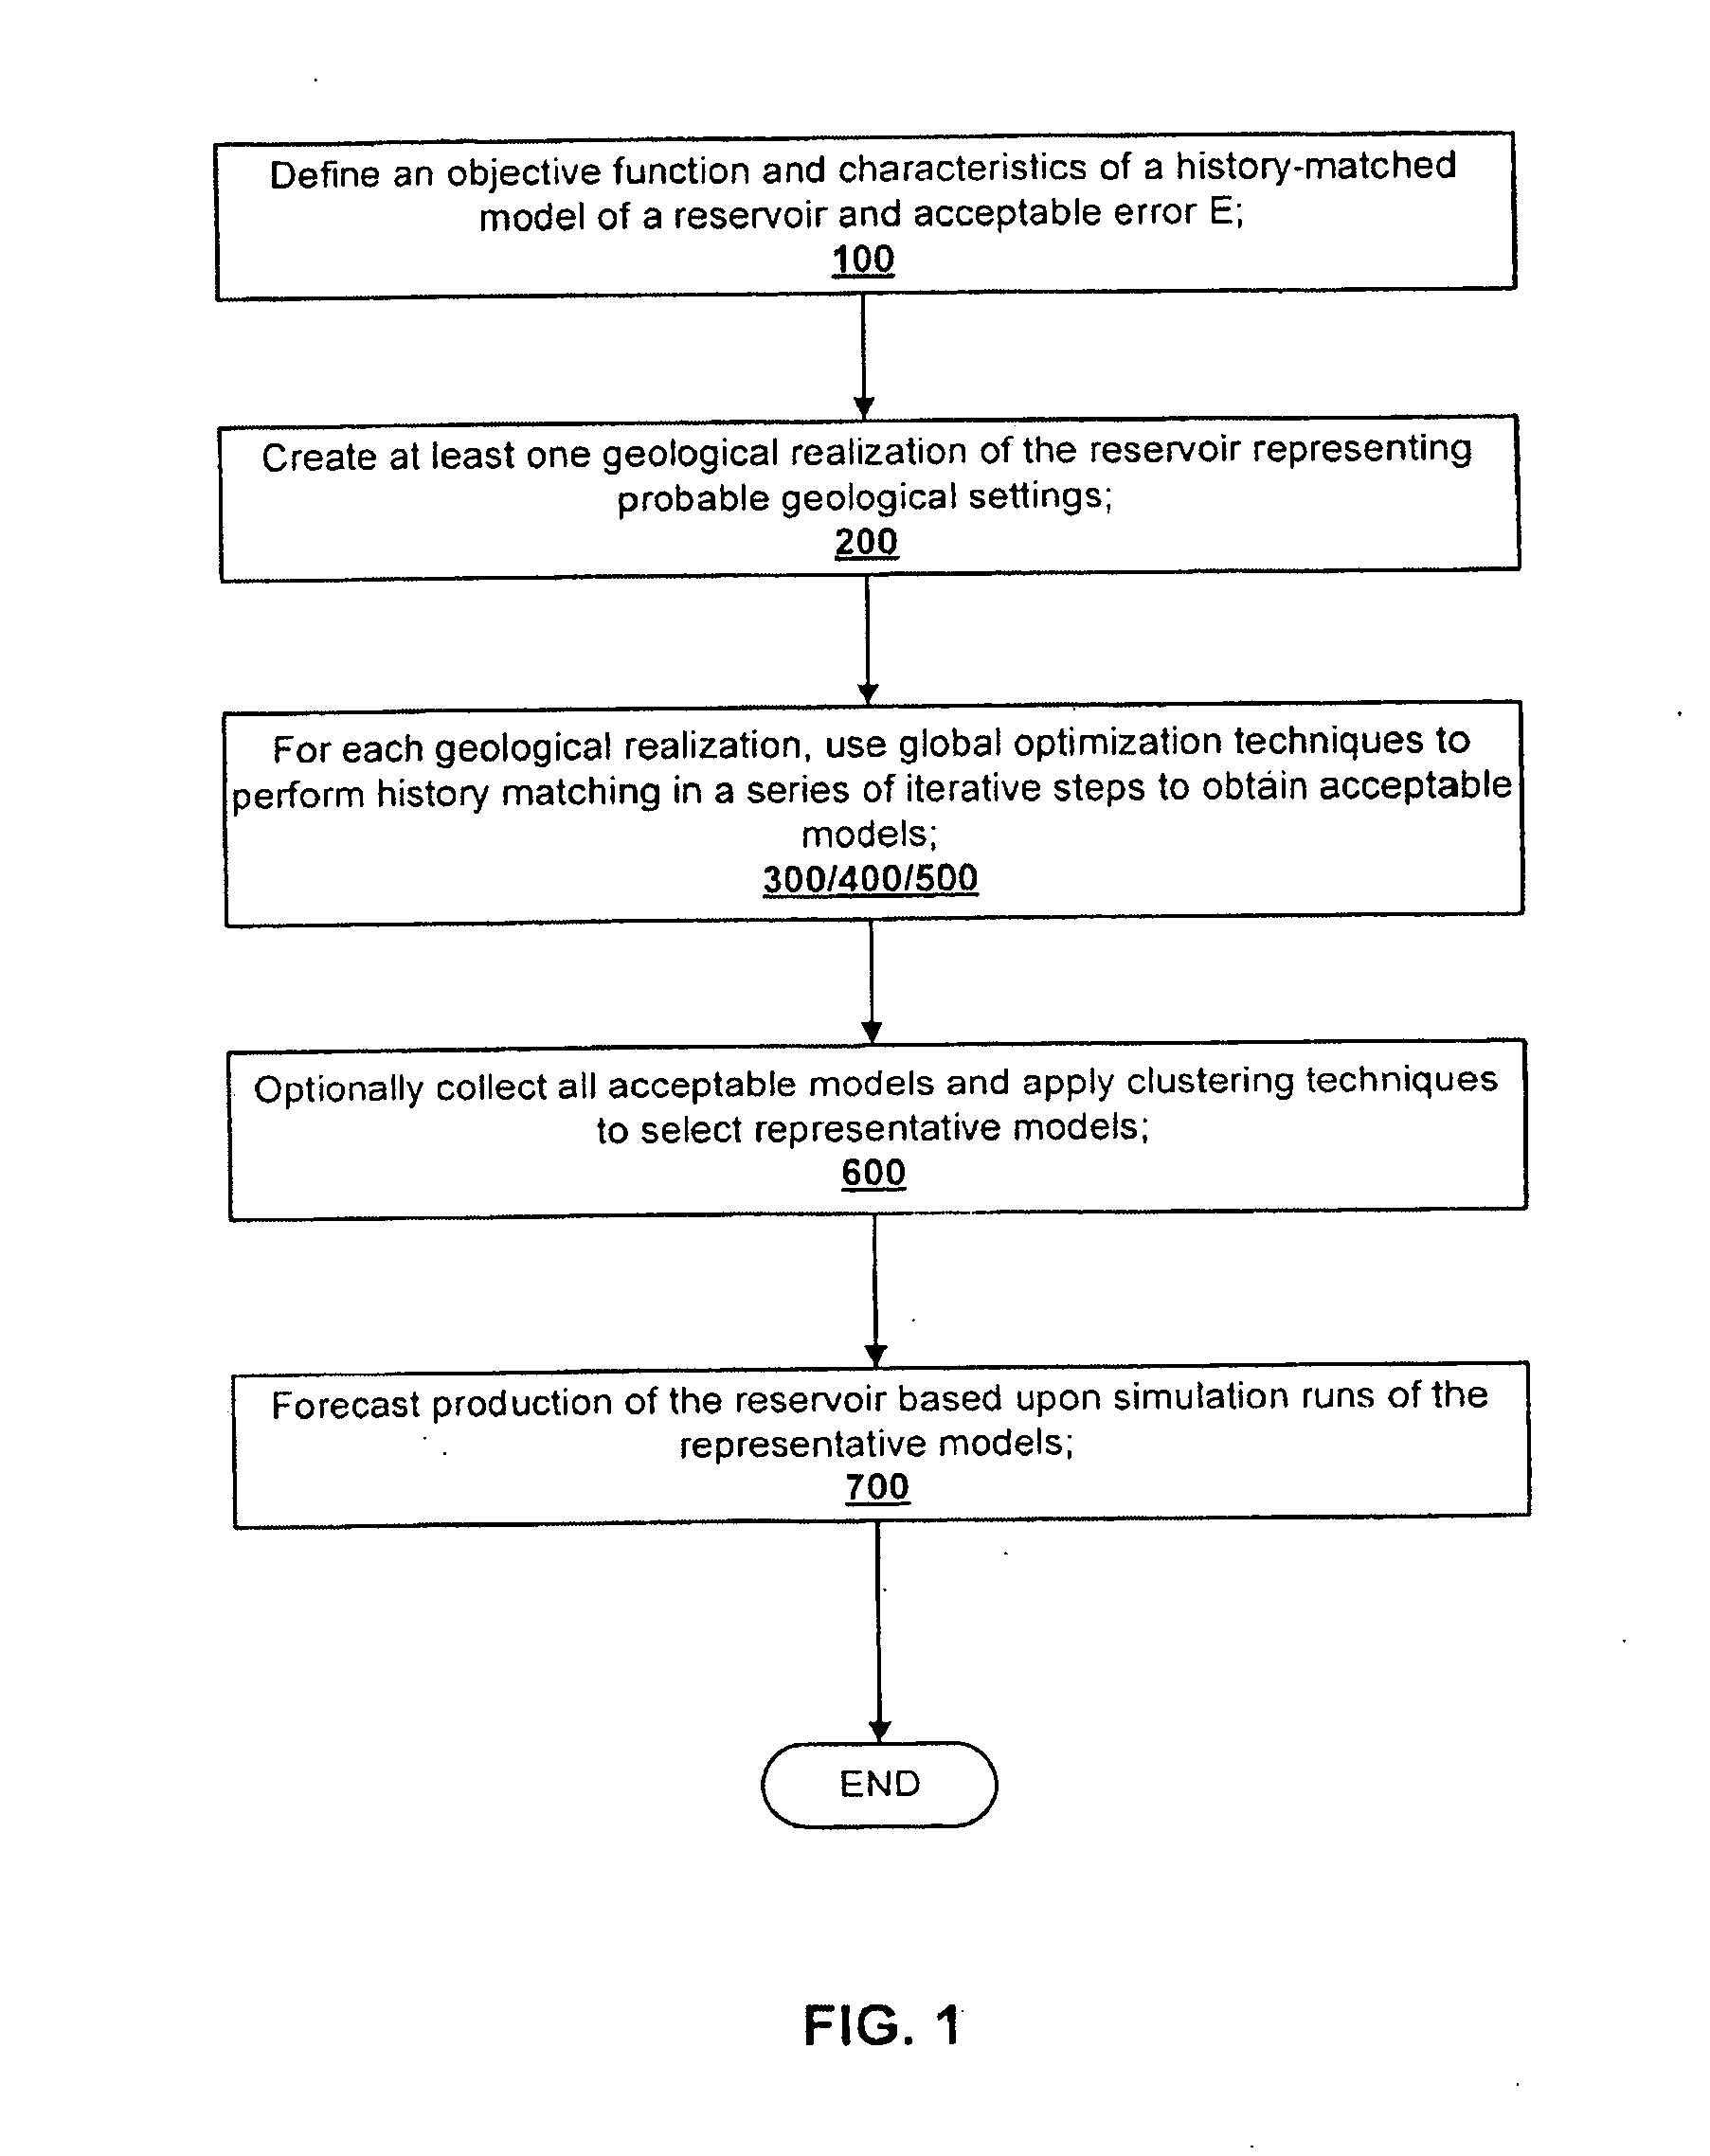 Method for history matching and uncertainty quantification assisted by global optimization techniques utilizing proxies